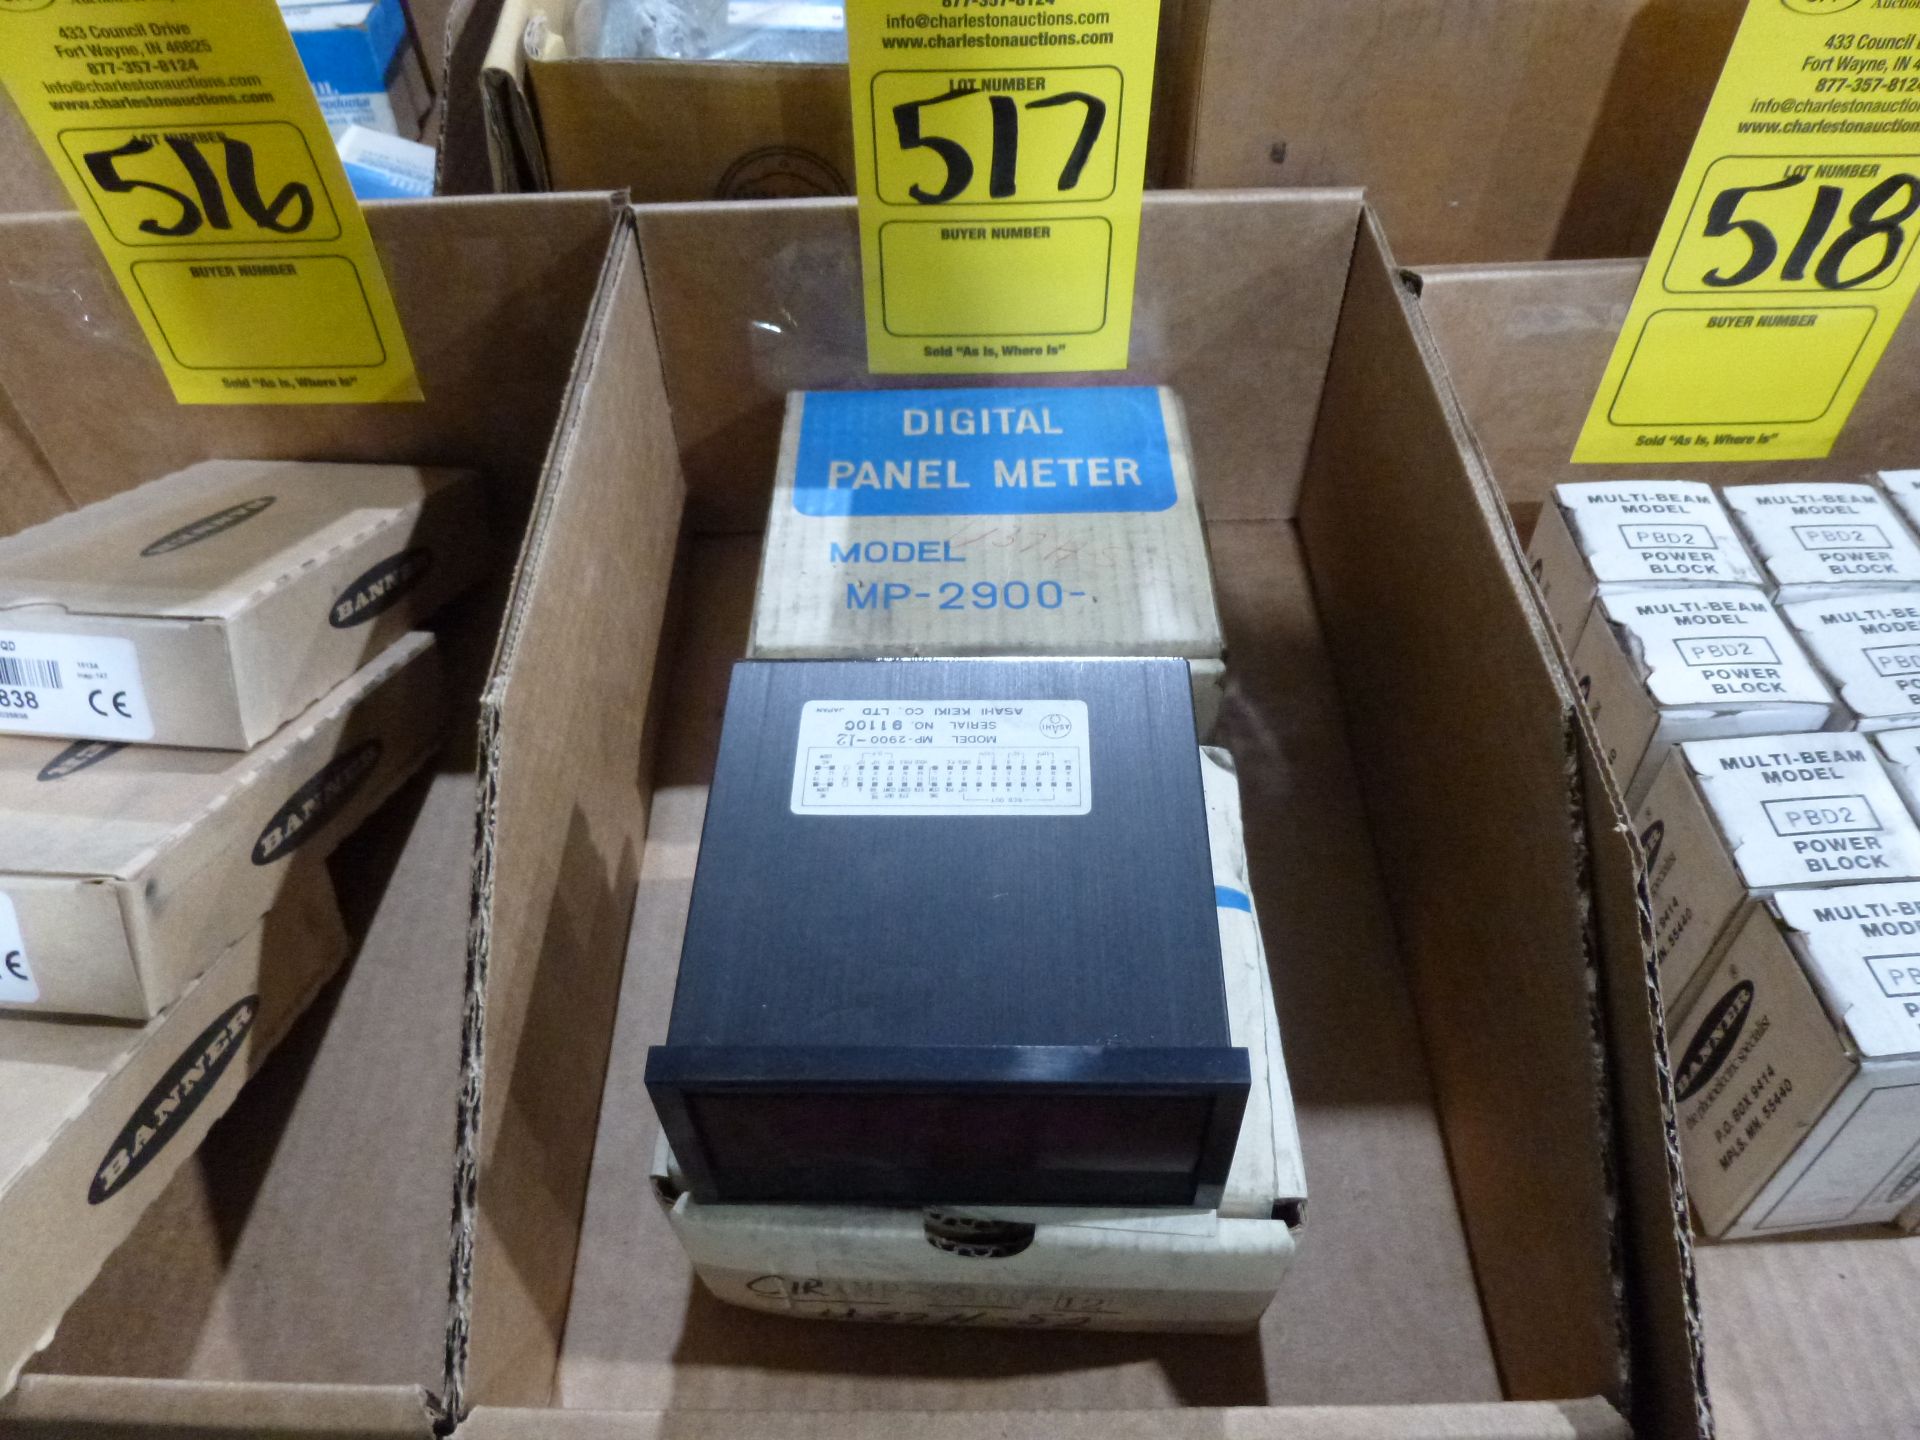 Qty 2 Asahi panel meters Model MP-2900-12, new in boxes, as always with Brolyn LLC auctions, all